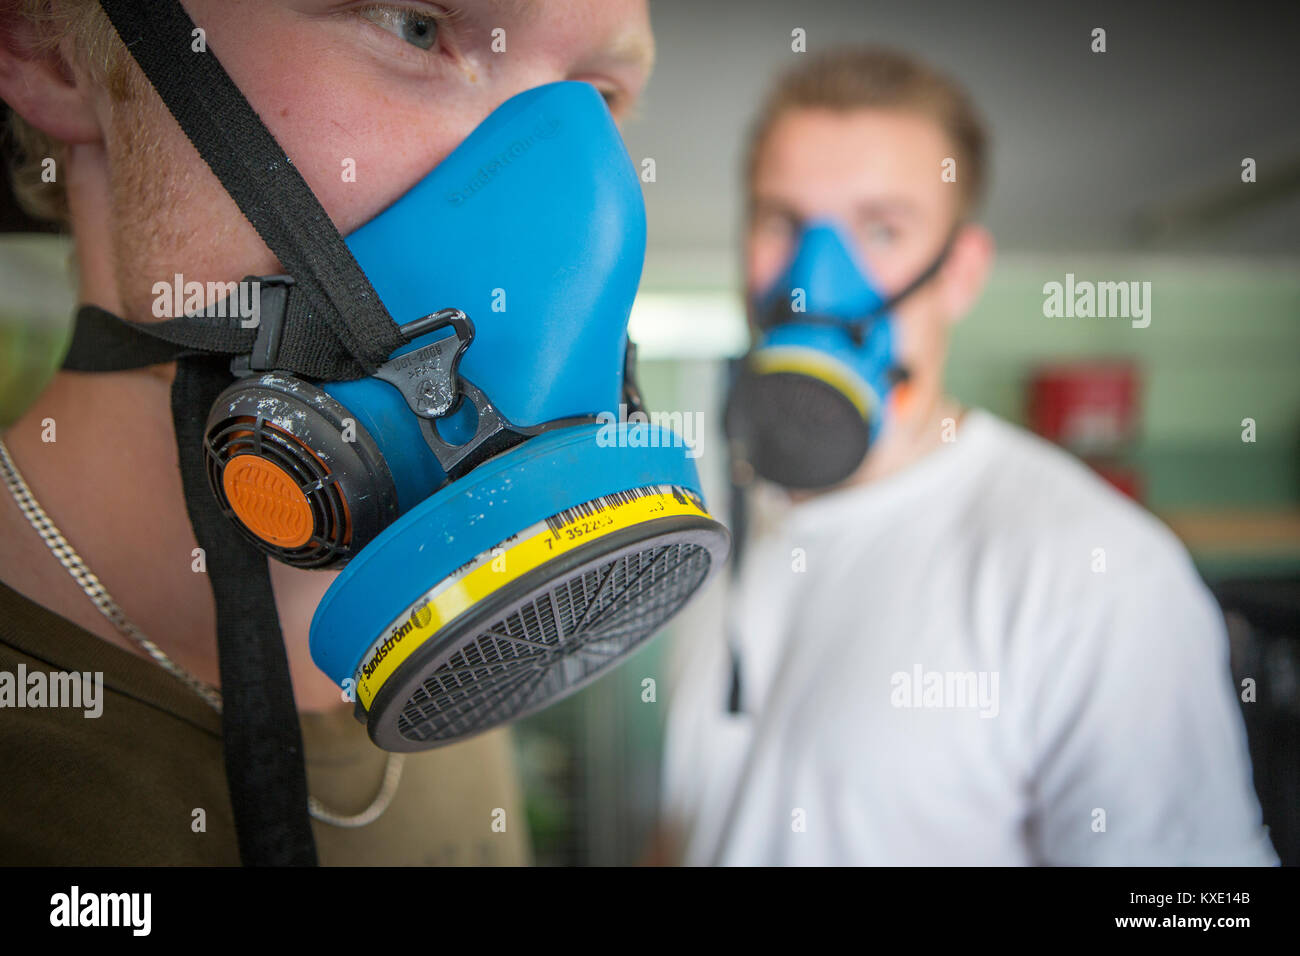 Man with face mask, Upplands Väsby, Sweden. Stock Photo